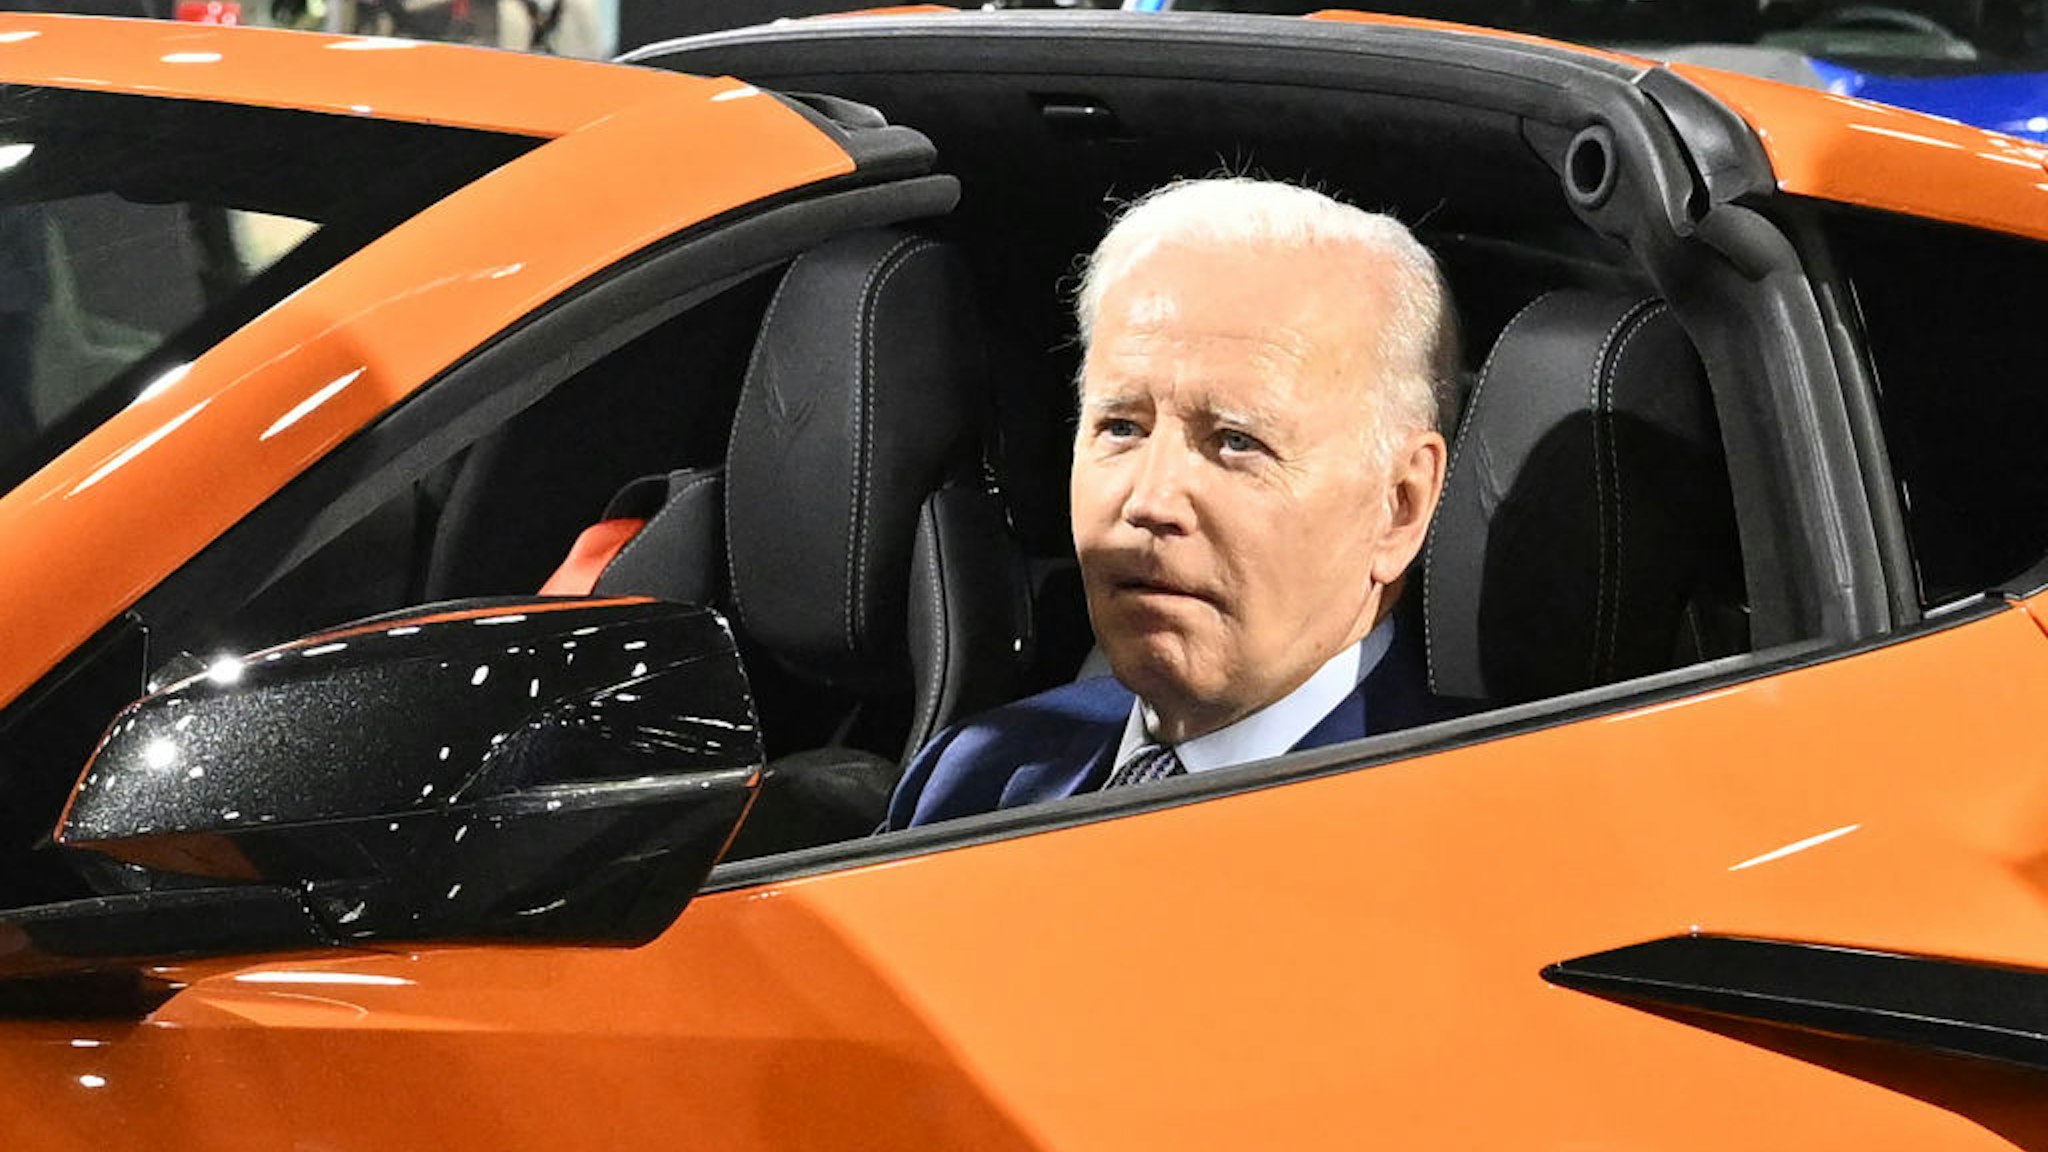 US President Joe Biden sits in a Chevrolet Corvette Z06 as he tours the 2022 North American International Auto Show at Huntington Place Convention Center in Detroit, Michigan on September 14, 2022. - Biden is visiting the auto show to highlight electric vehicle manufacturing. (Photo by Mandel NGAN / AFP) (Photo by MANDEL NGAN/AFP via Getty Images)